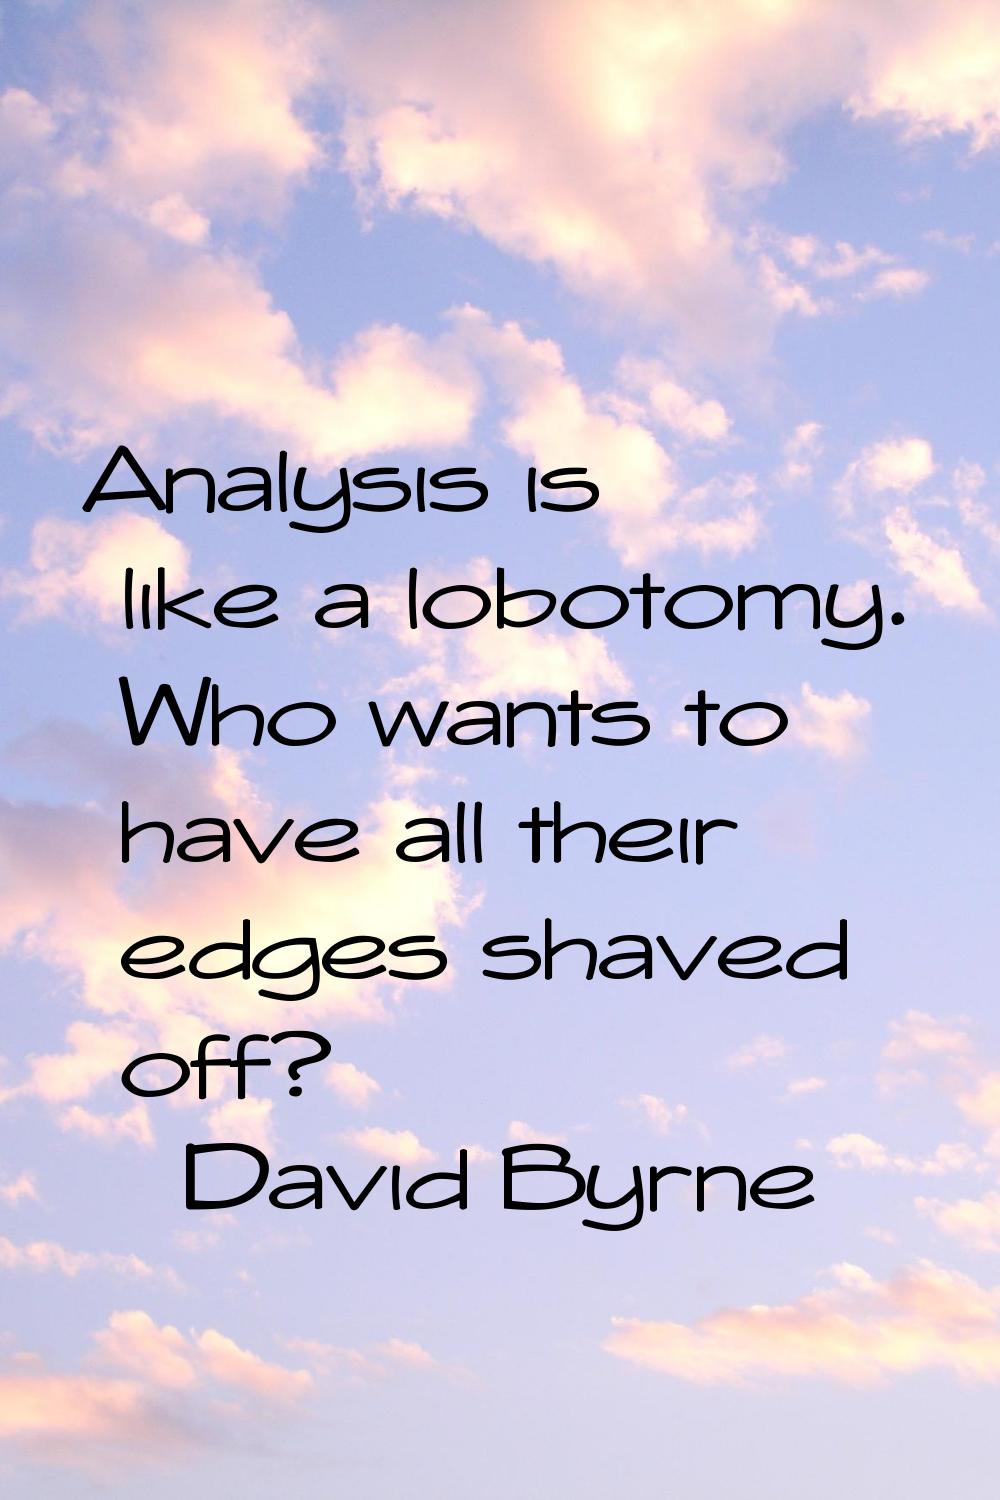 Analysis is like a lobotomy. Who wants to have all their edges shaved off?